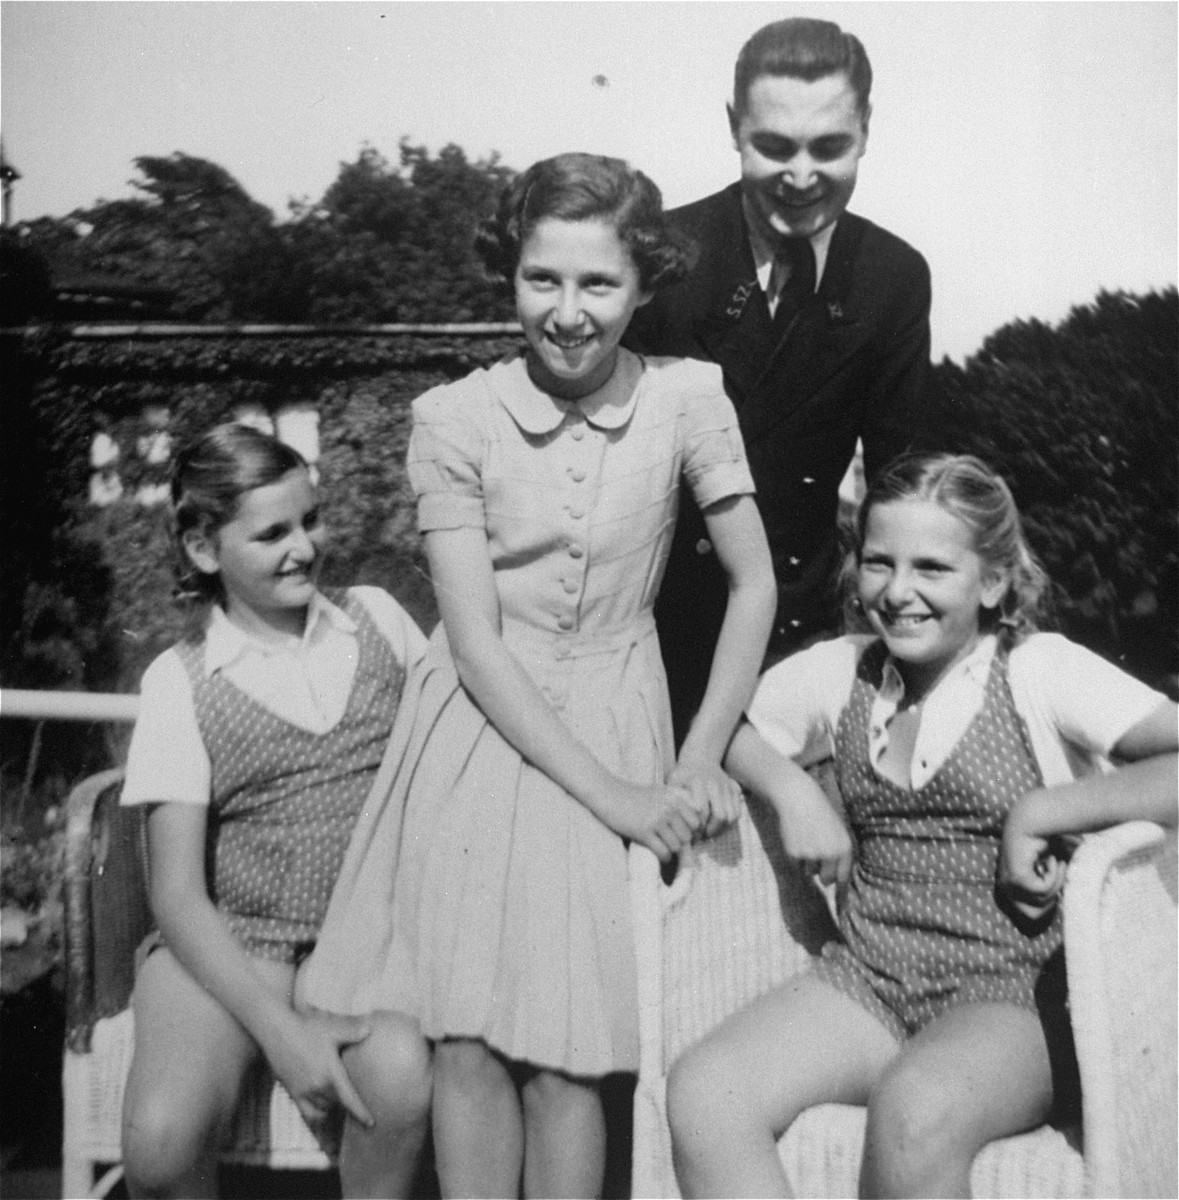 Dorottya (Dolly) Dezsoefi, far left, and her twin sister, Ida Marianne (Mari), with Mr. Zimmermann and his daughter at a resort hotel.  

The Zimmermanns did not survive the war.